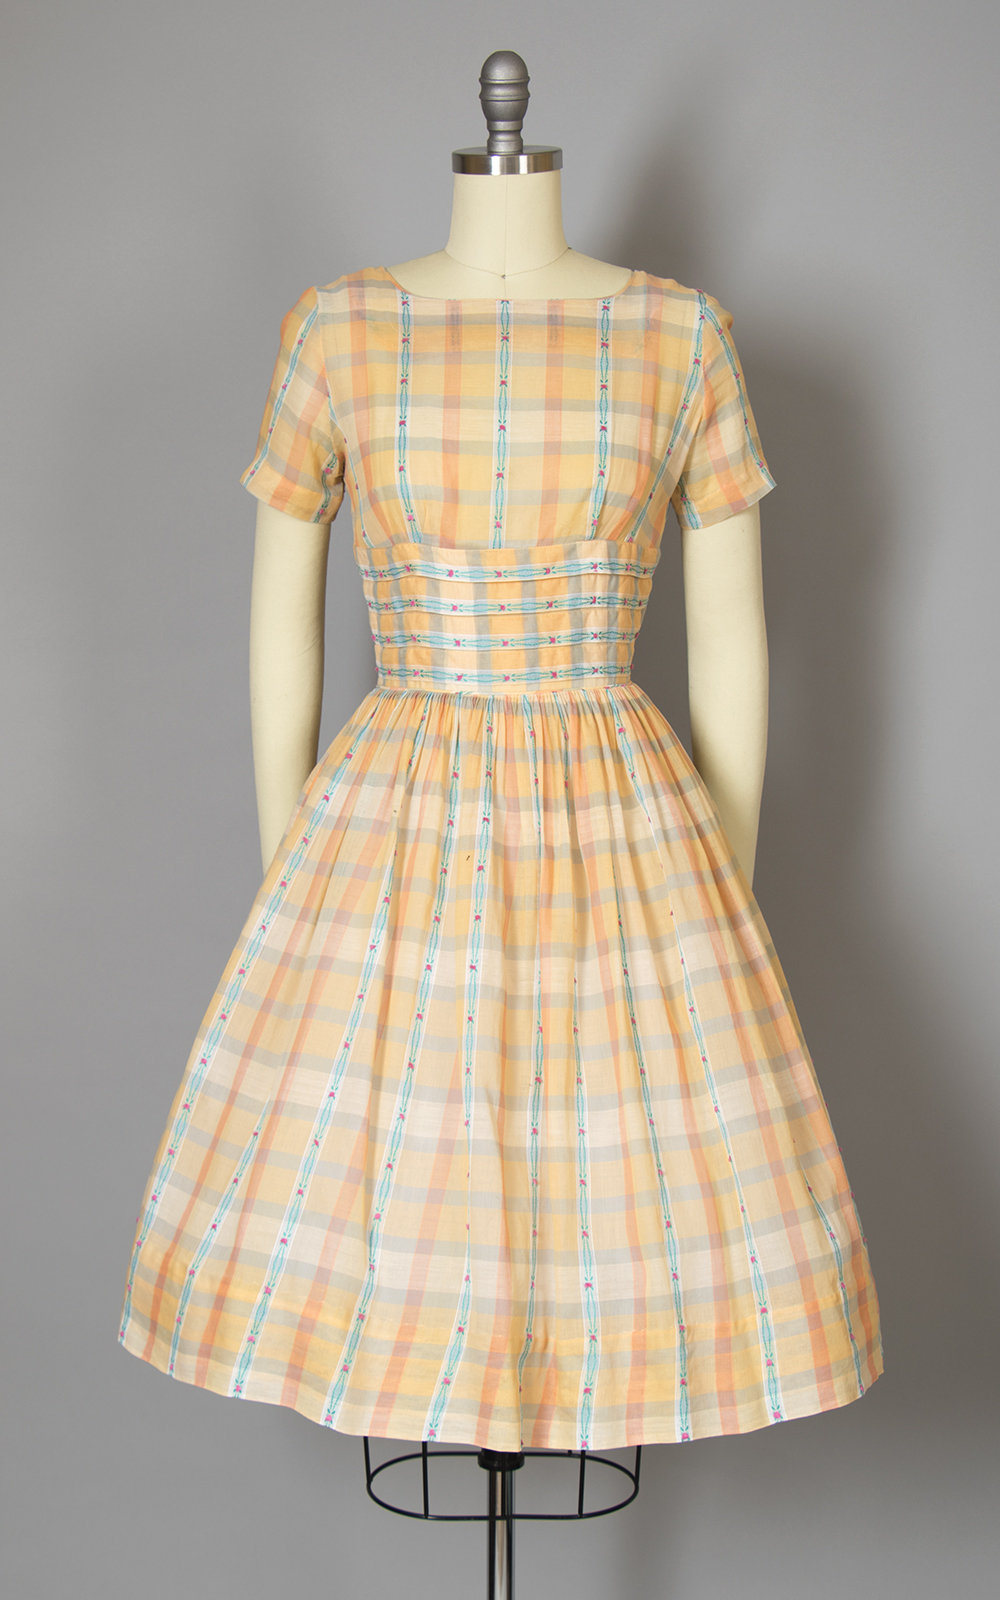 Vintage 1950s Dress | 50s Peach Peach Plaid Floral Woven Cotton Voile Full Skirt Day Dress (x-small)